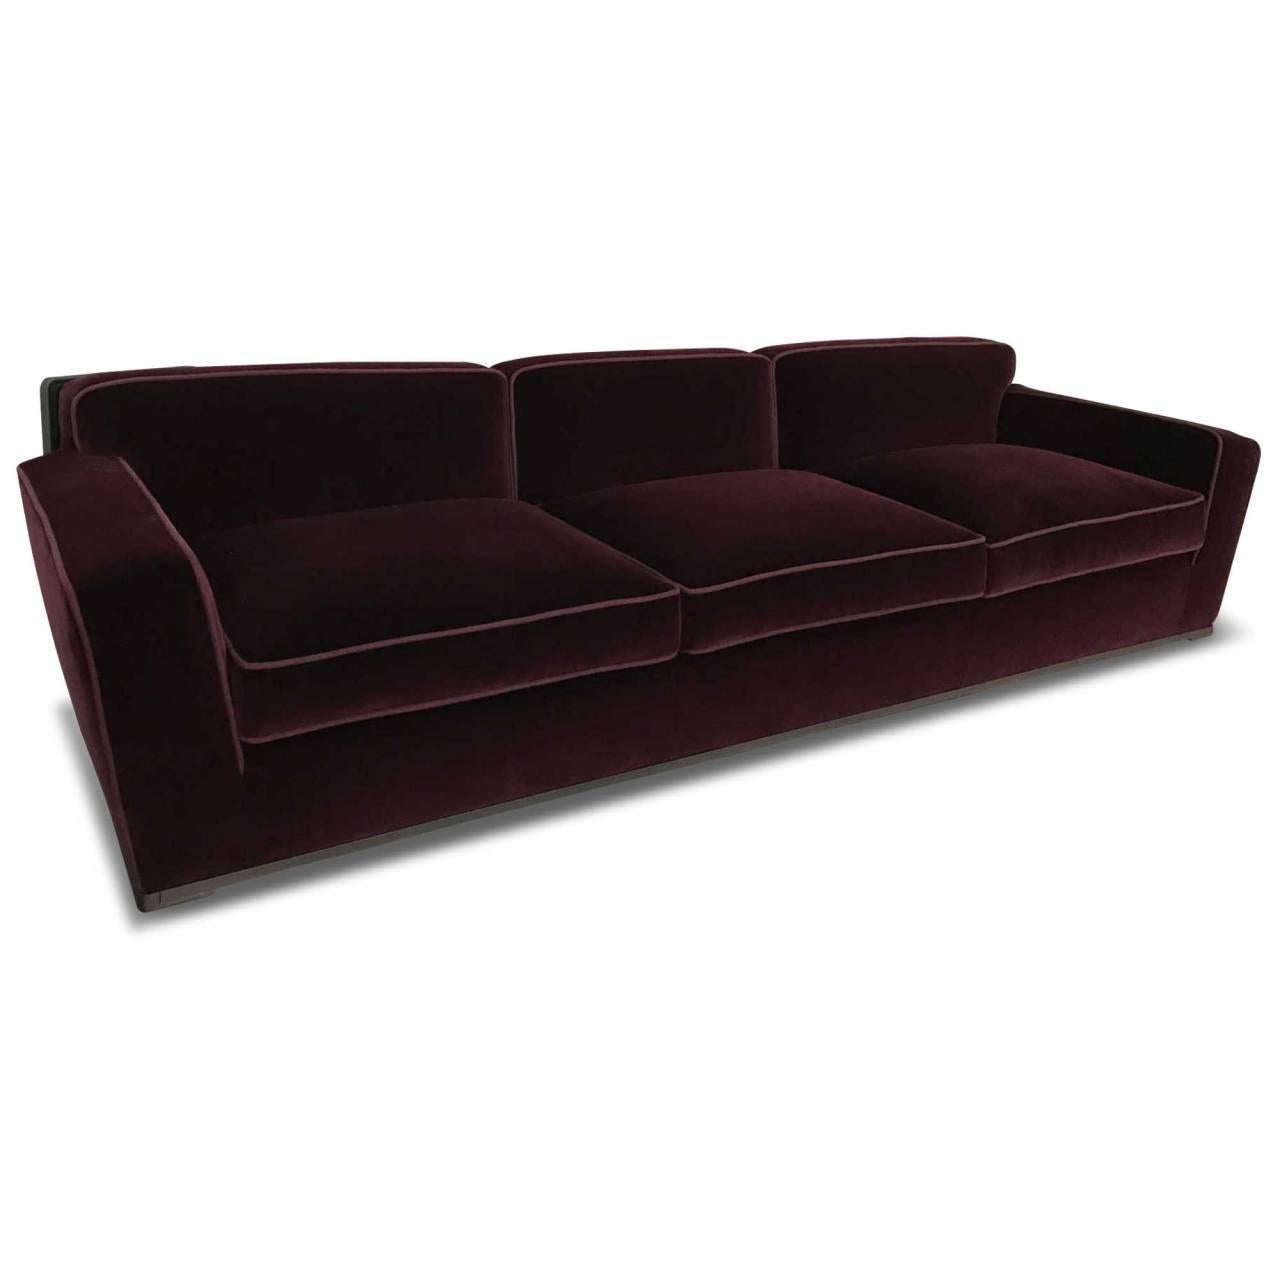 With pleasure we present to you the noble sofa "Solatium", designed and manufactured ba B & B Italia in Italy, that creates a noble appearance through its massive design in combination with the velvety burgungy fabric finish.
The